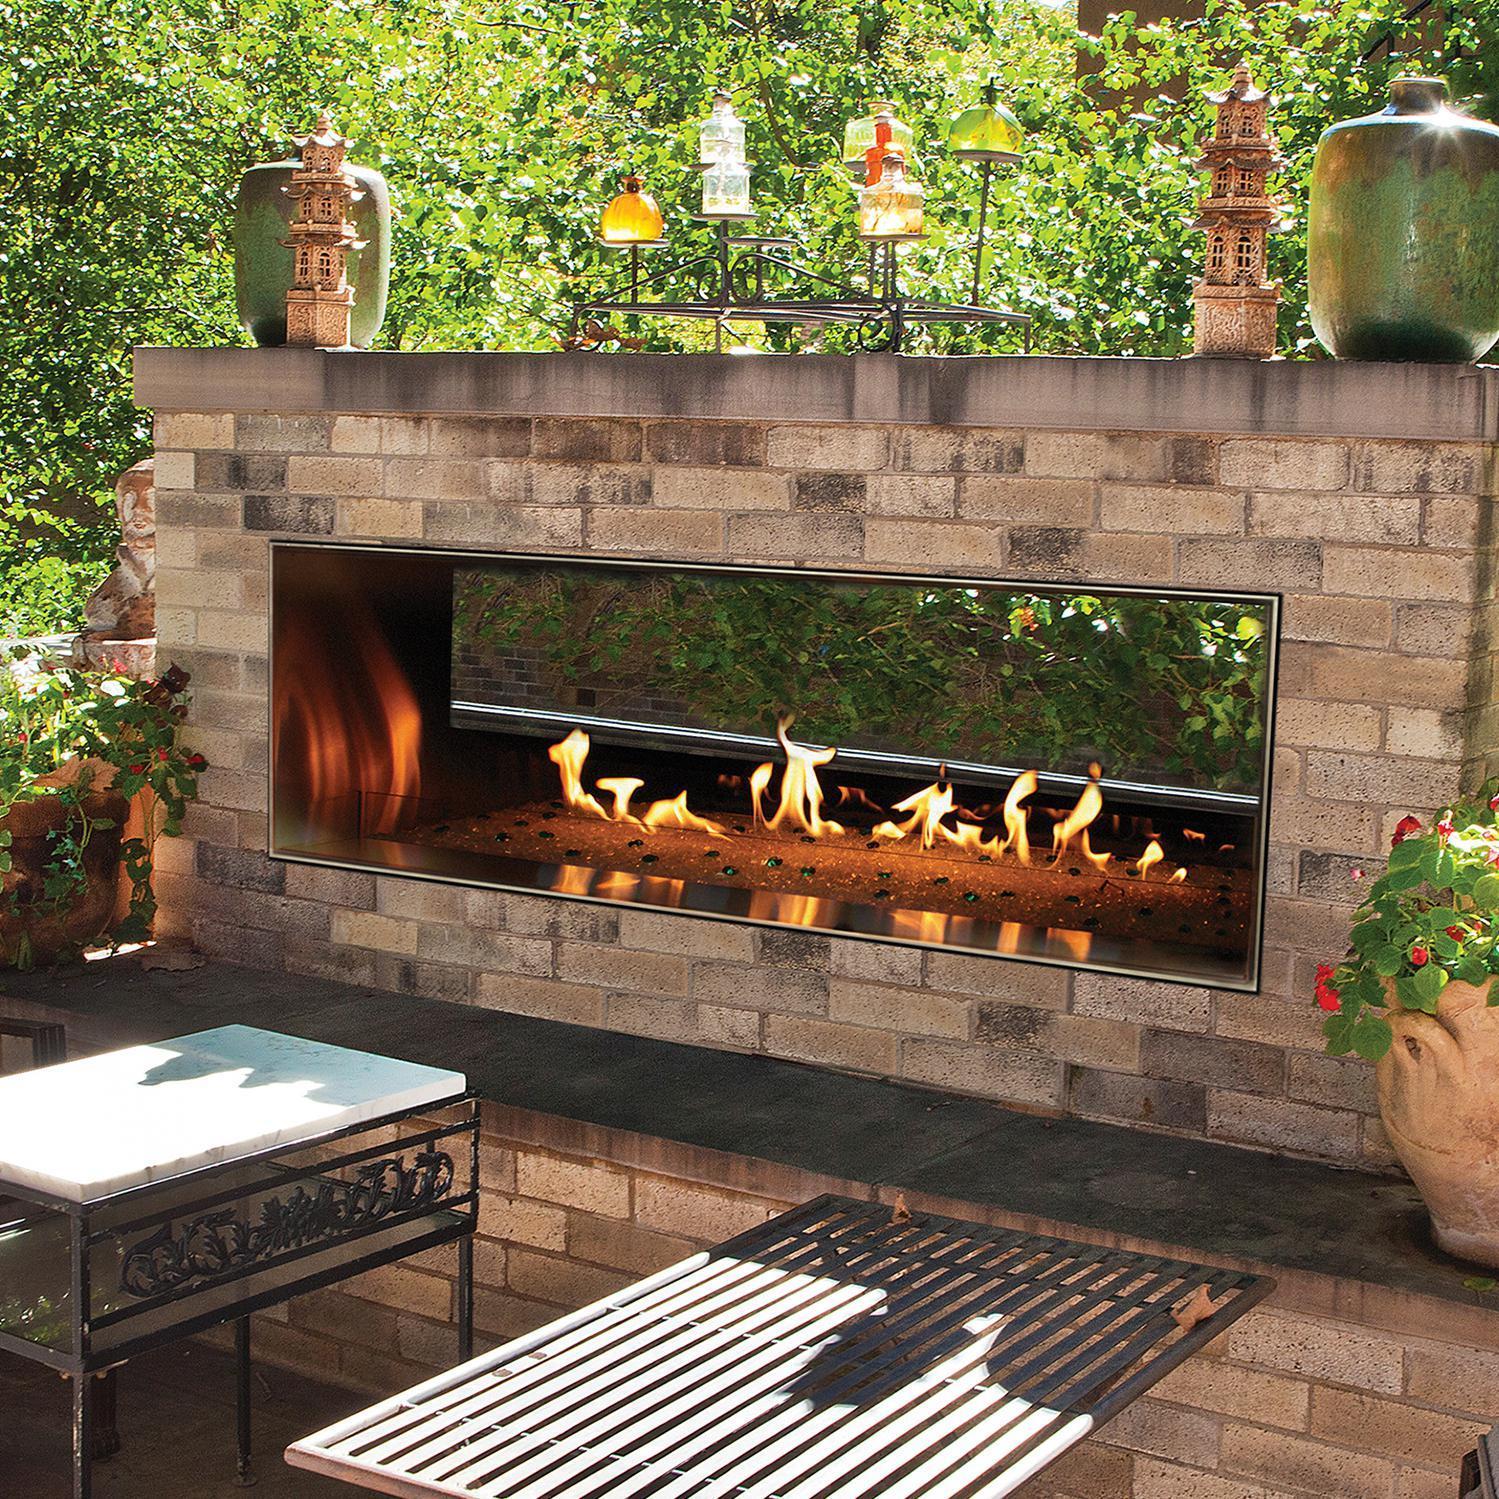 48 Empire Outdoor Linear See Thru, Linear Gas Fireplace Outdoor